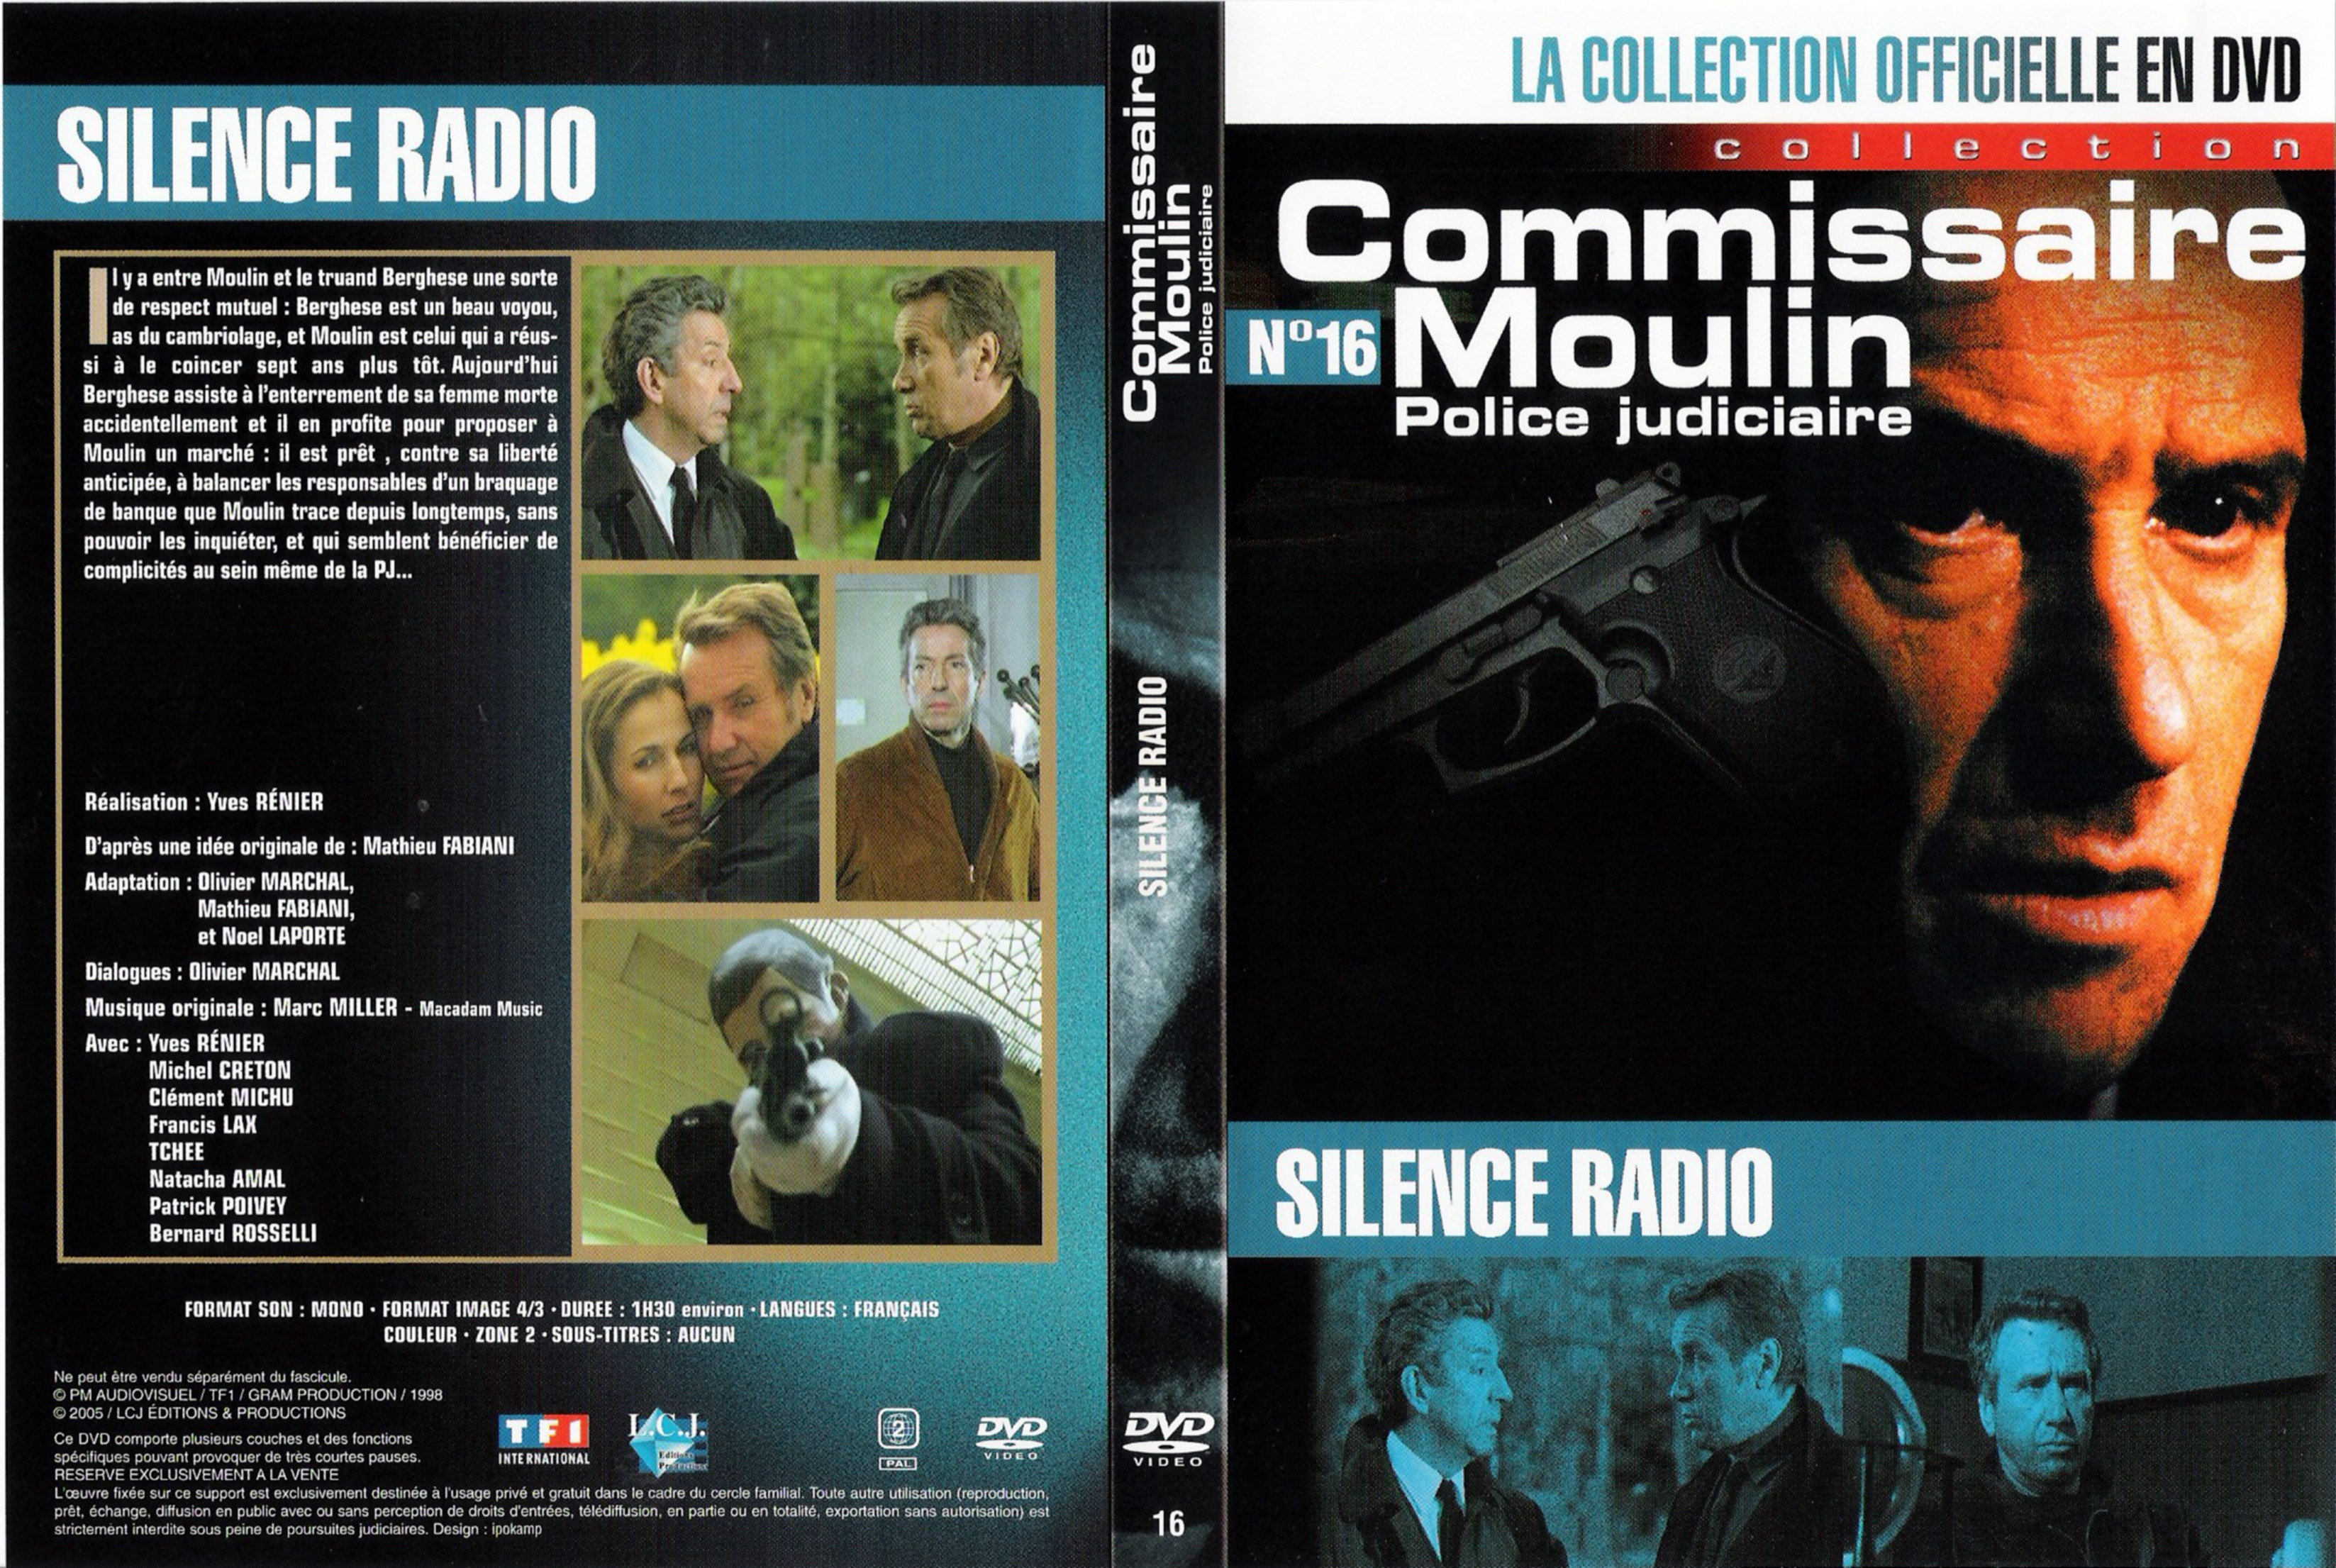 Jaquette DVD Commissaire Moulin - Silence radio